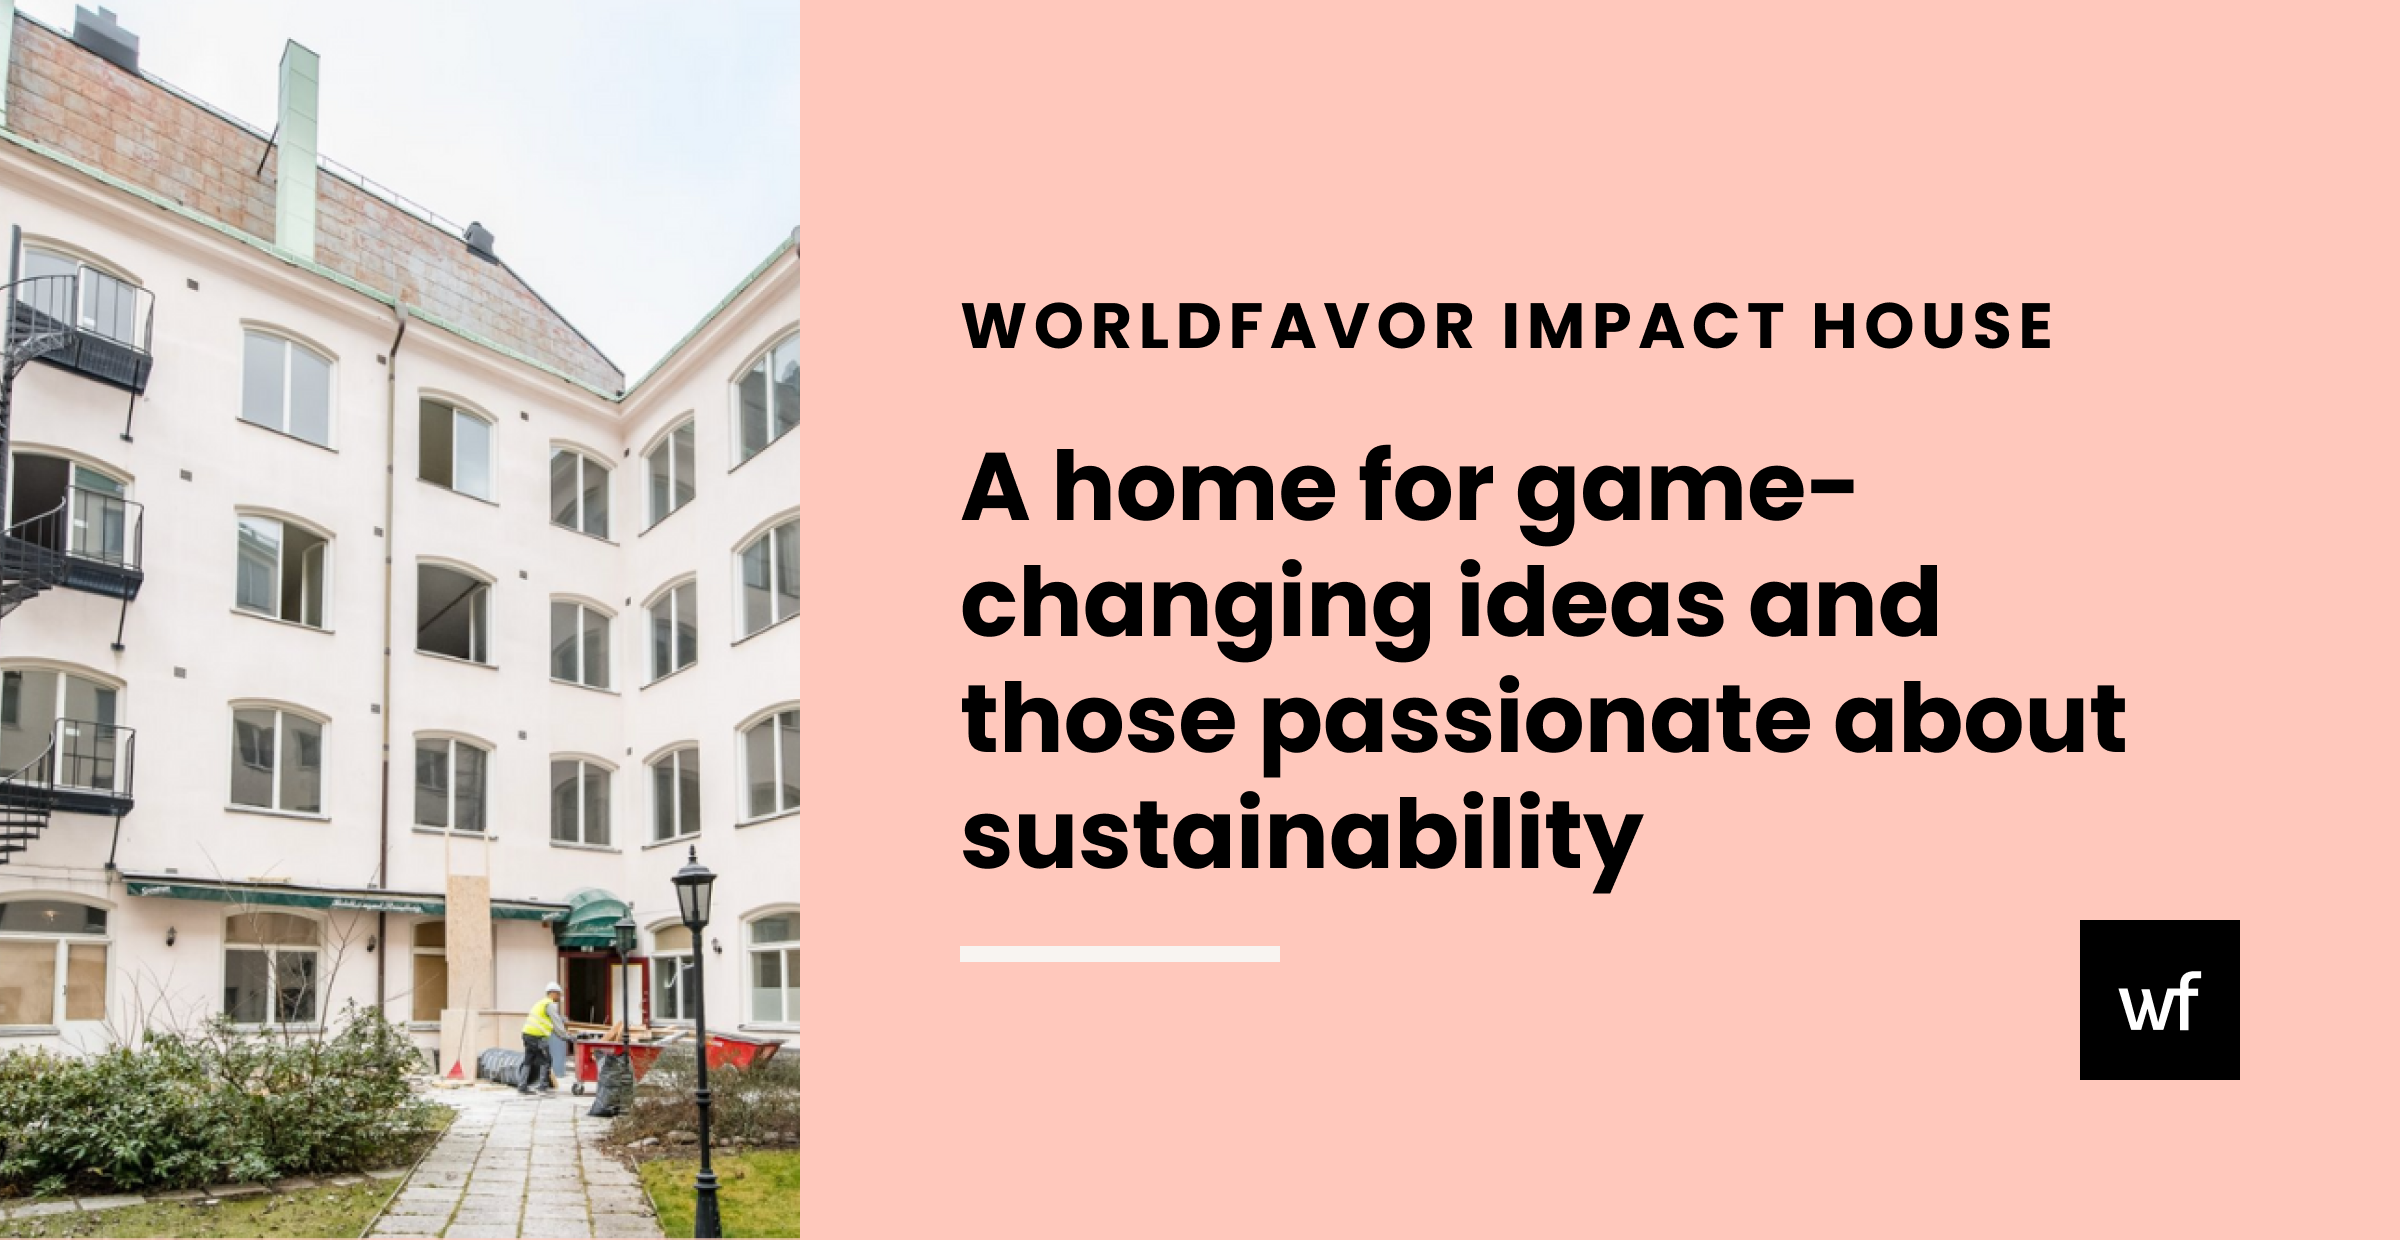 Worldfavor Impact House set to open its doors in January 2023